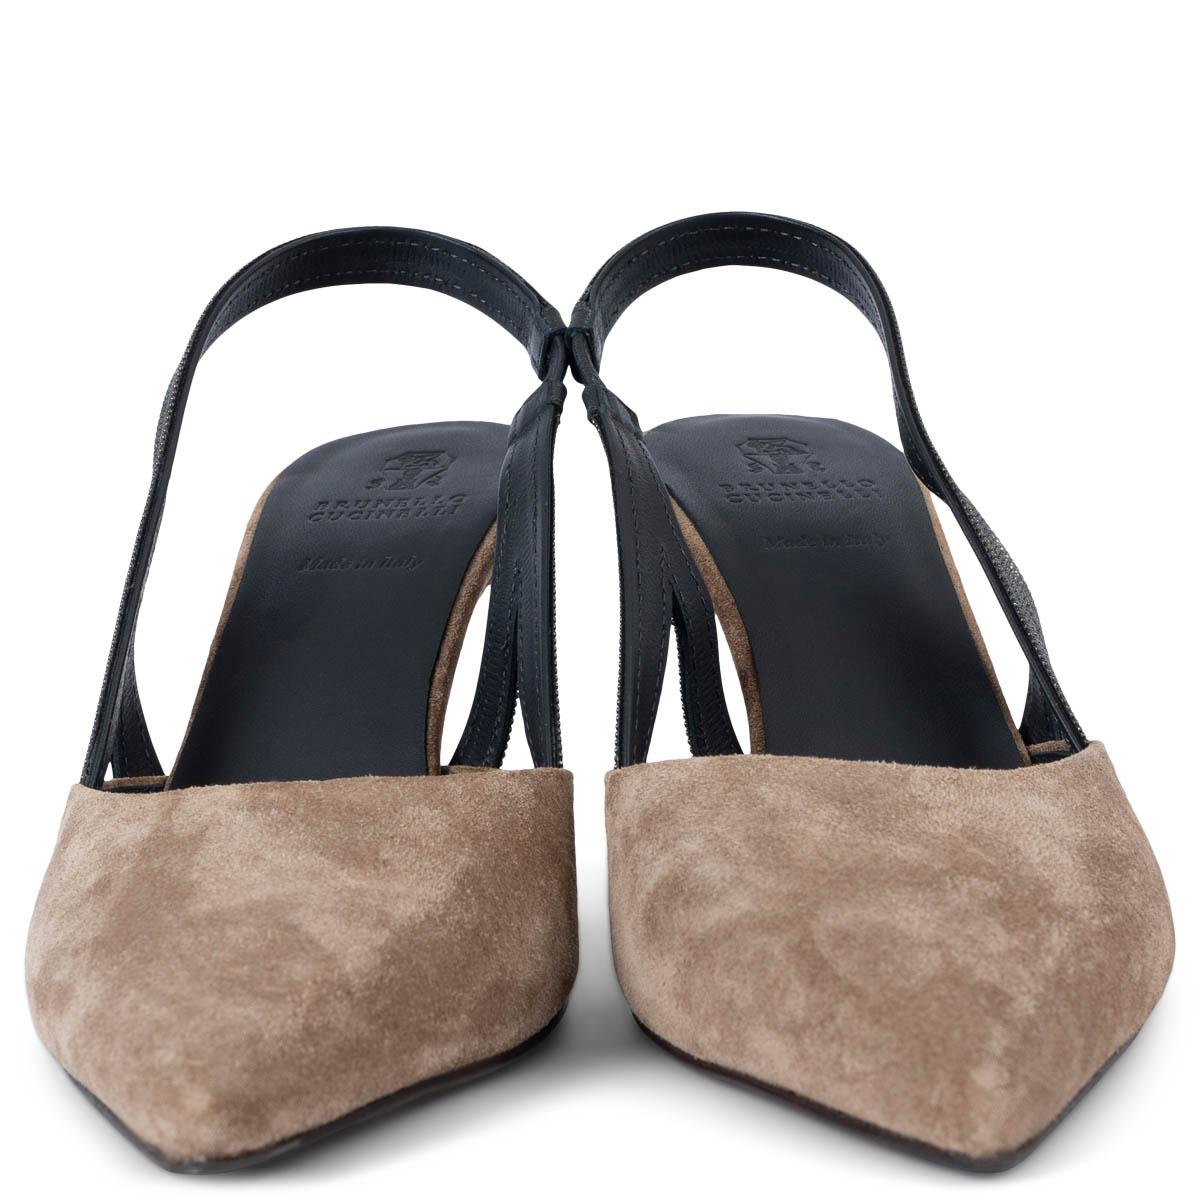 100% authentic Brunello Cucinelli pointed-toe pumps in kid taupe suede with Monili trim anchored by a sleek stiletto heel. Monili-embellished slingback strap. Brand new. 

Measurements
Imprinted Size	38
Shoe Size	38
Inside Sole	25cm